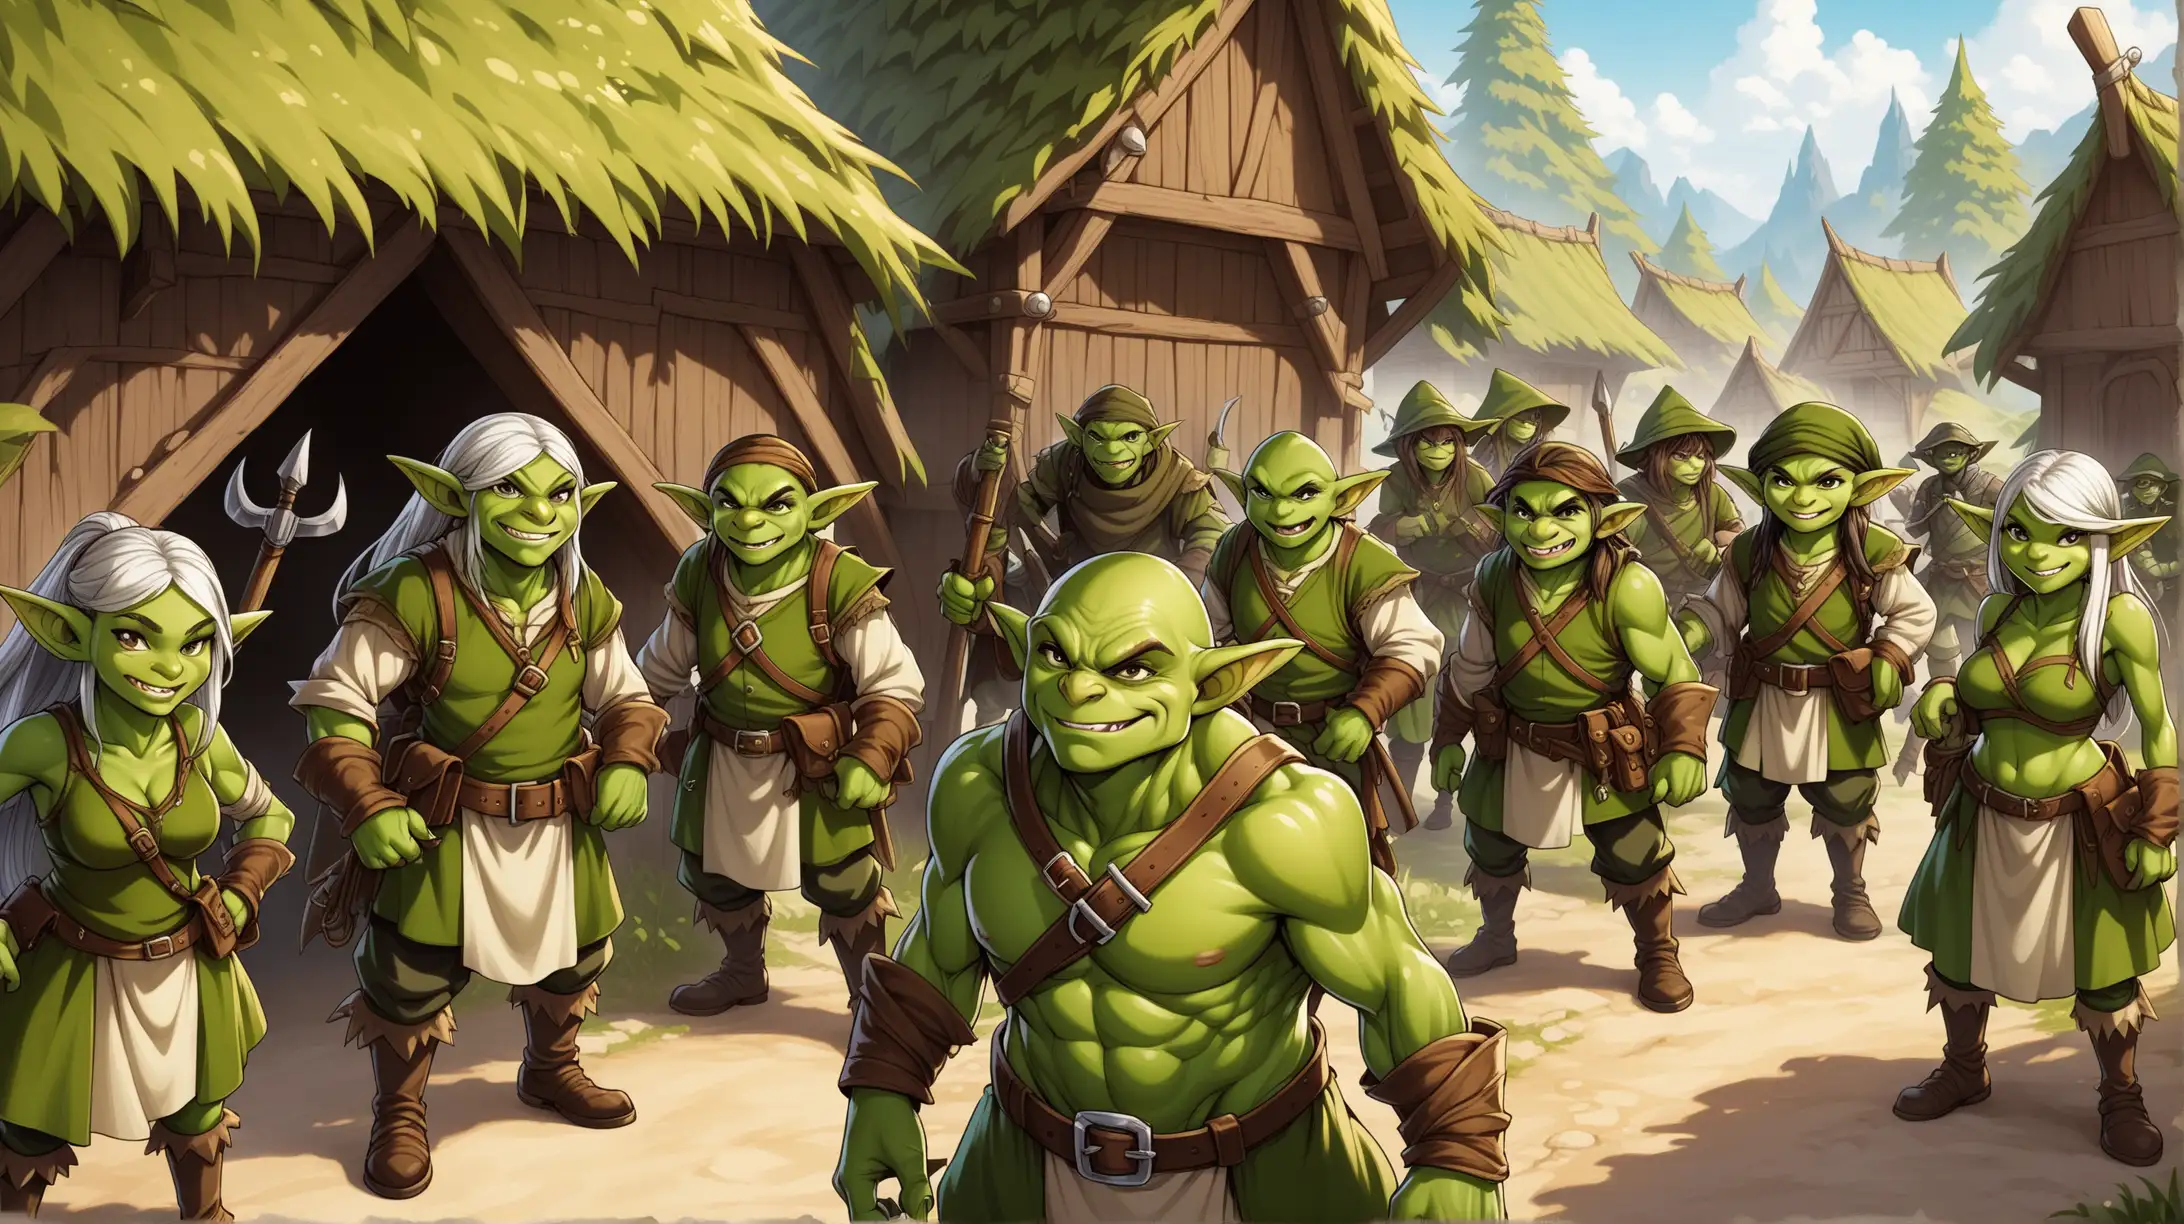 tribe of green goblins with olive green skin, rogues and rangers, women and men, goblin village, Medieval fantasy